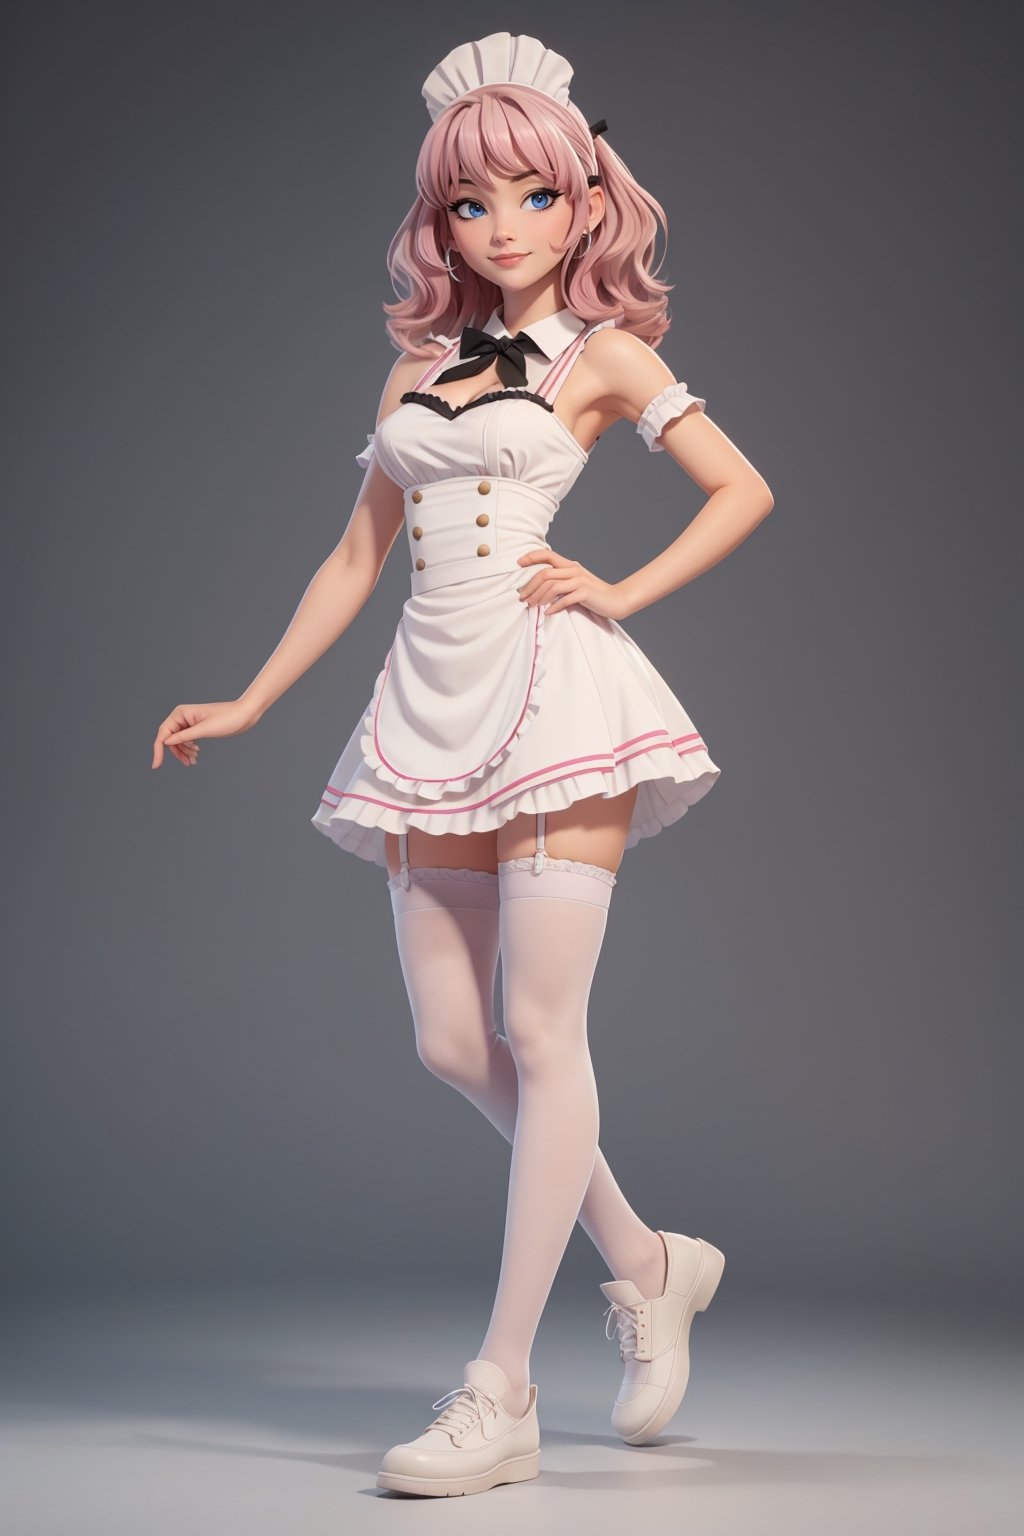 character sheet,looking to the camera,beautiful, good hands, full body, good body, 18 year old girl body,sexy pose, full_body,character_sheet, shoulder length fluffy semi wavy hair, pink hair,maid clothes, white stockings, greeting pose, black shoes